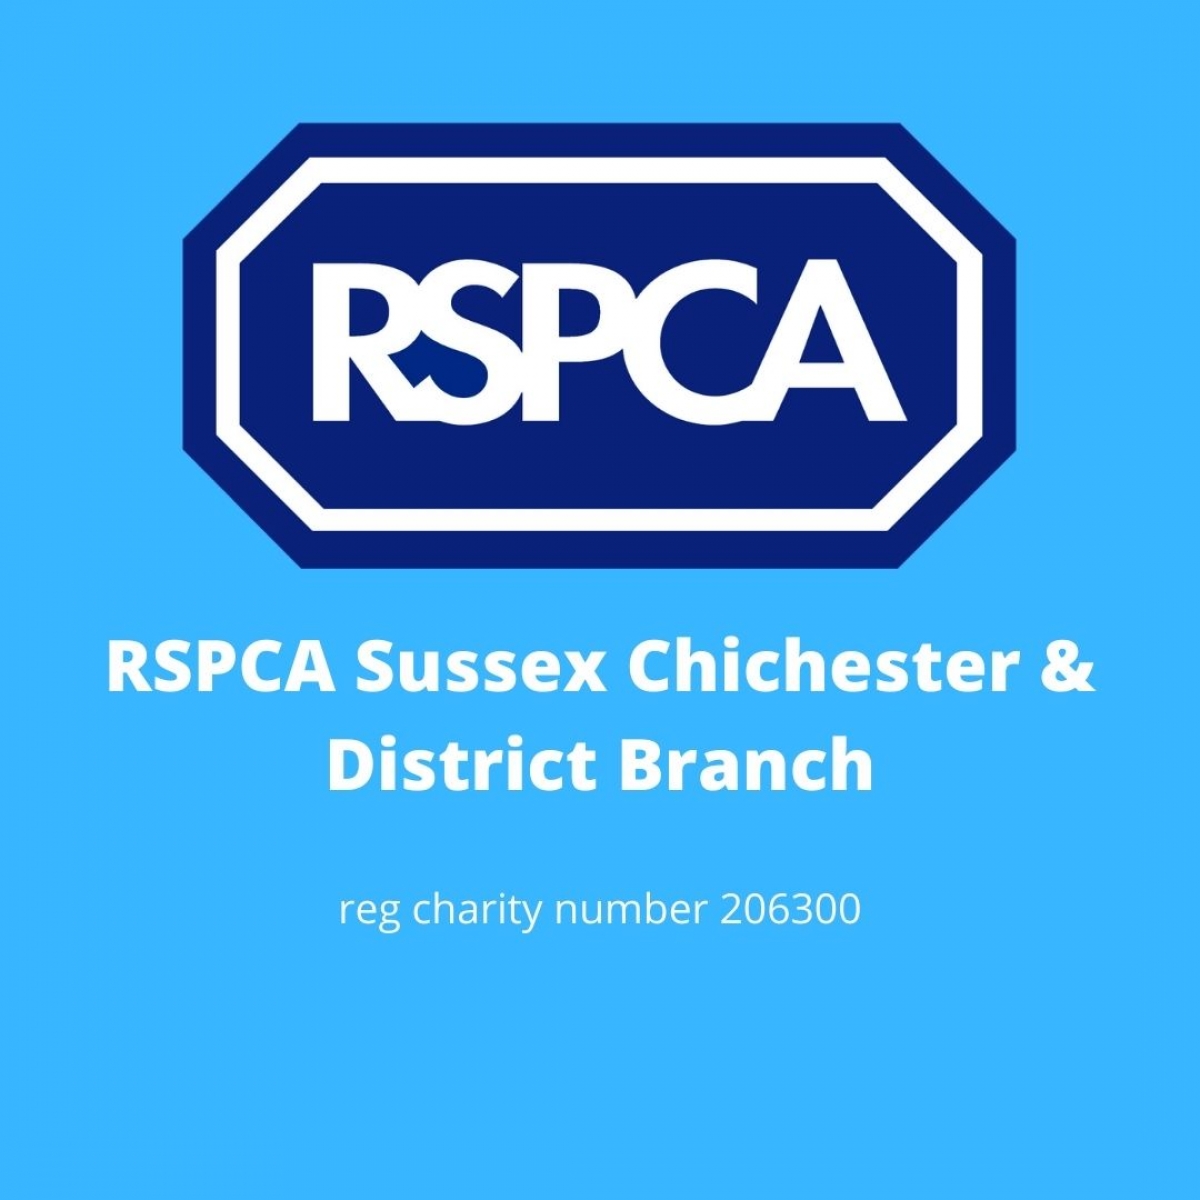 RSPCA Sussex Chichester and District Branch eCards